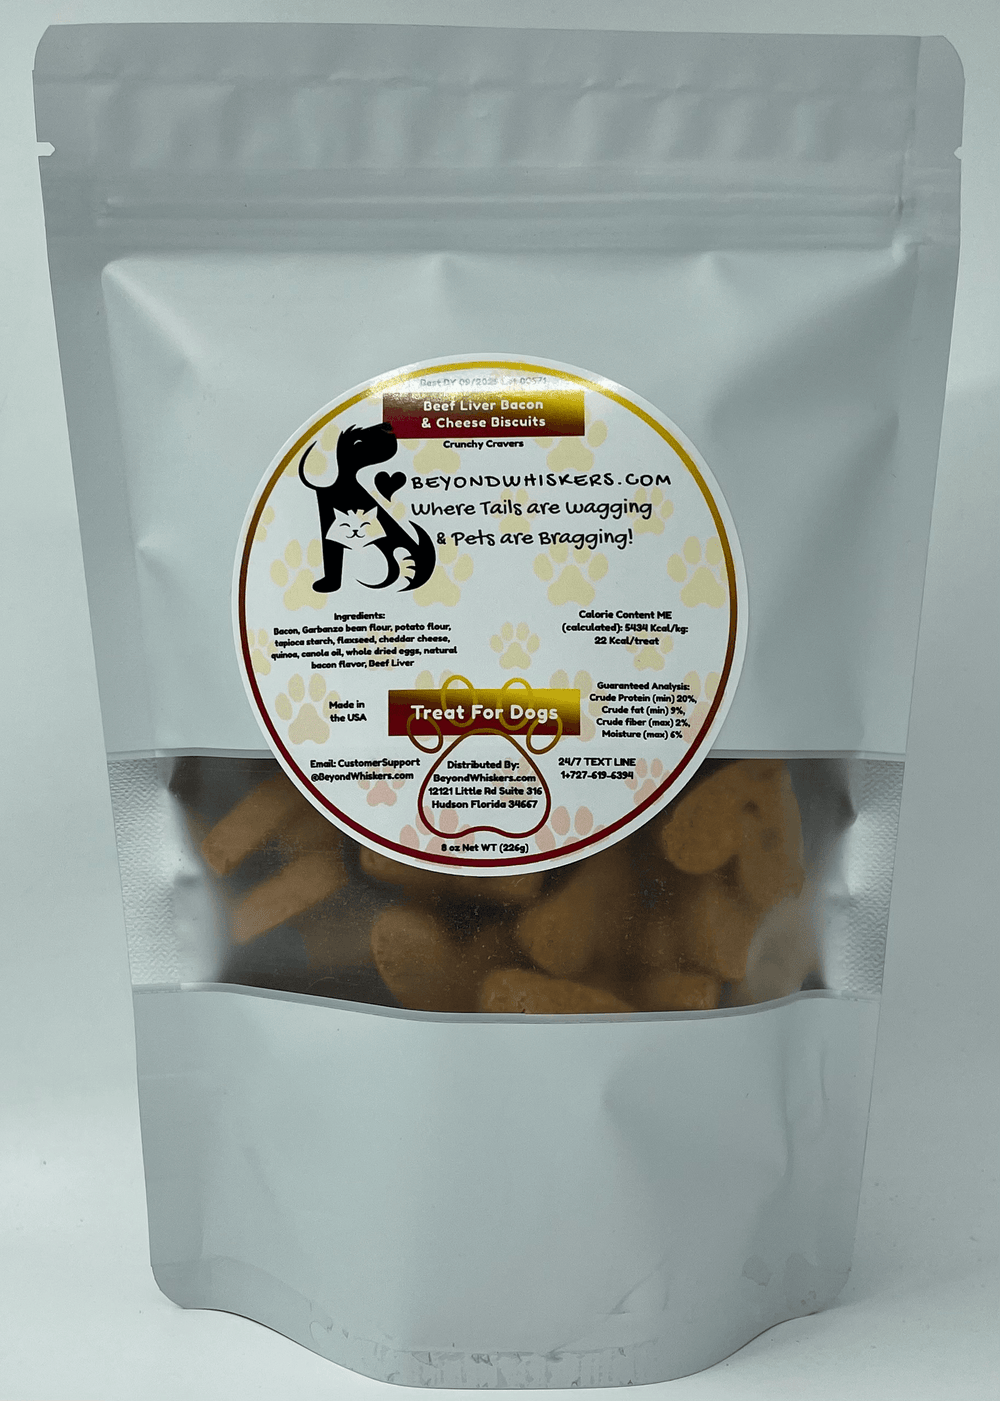 Beef Liver Bacon and Cheese dog treats - EX-STOCK CANADA